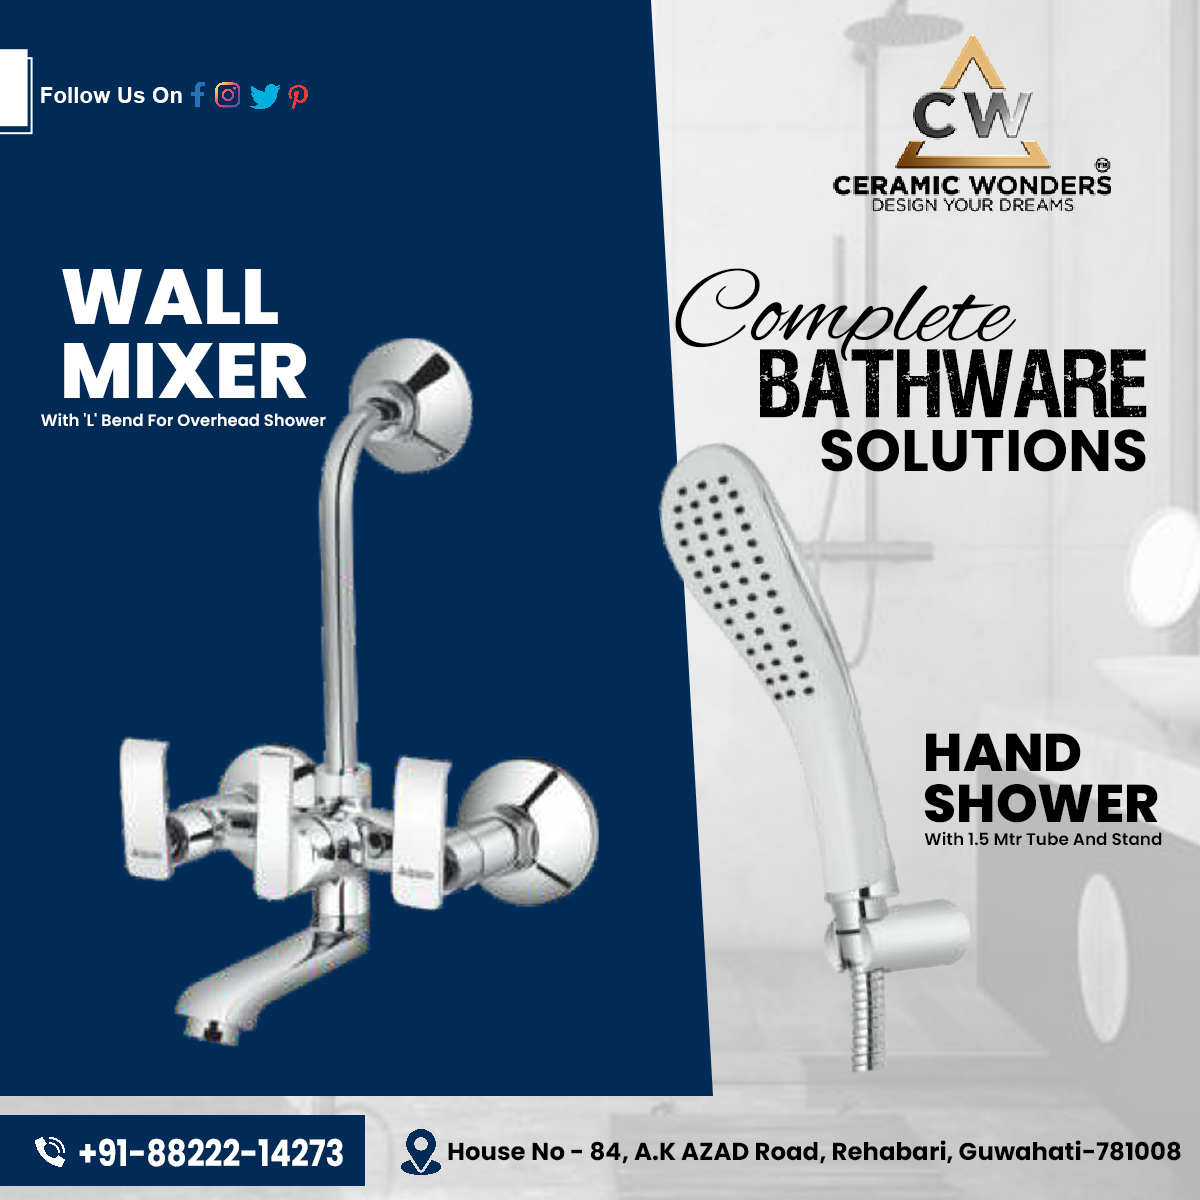 🚿 Transform your bathing experience with Ceramic Wonders' complete bath mixer hand shower! 🛁💦 Enjoy ultimate convenience and luxury in your bathroom.

Contact us now to get yours. 📞088222 14273

#BathroomUpgrade #LuxuryLiving #CeramicWonders #ShowerExperience #HomeDecor